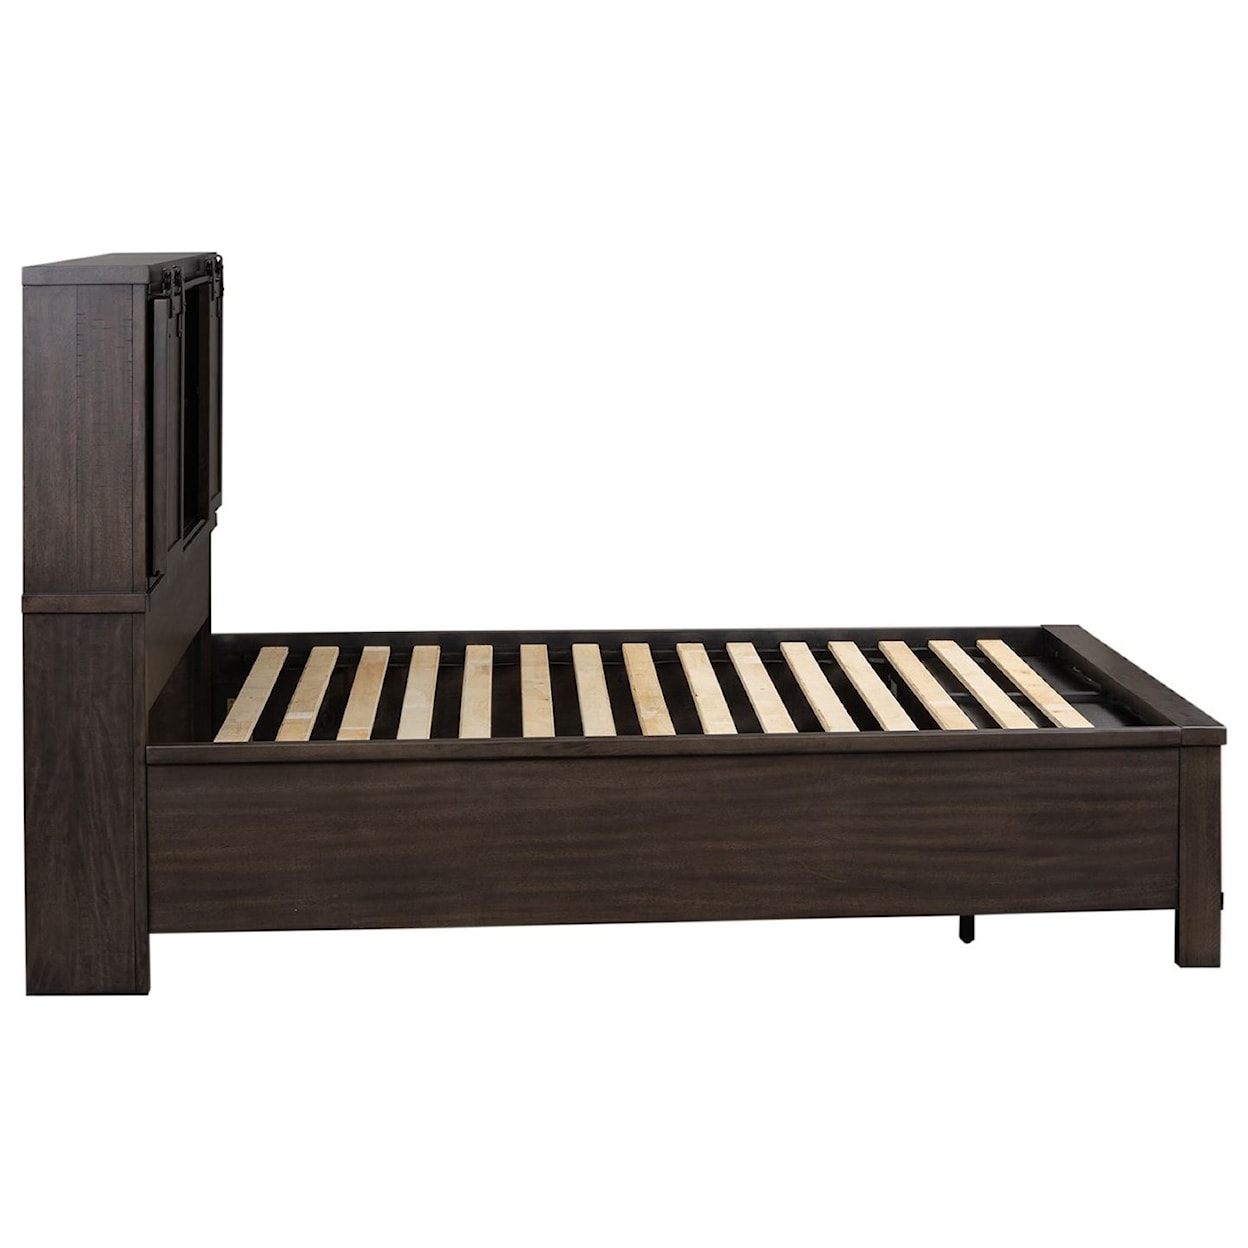 Liberty Furniture Thornwood Hills King Bookcase Bed